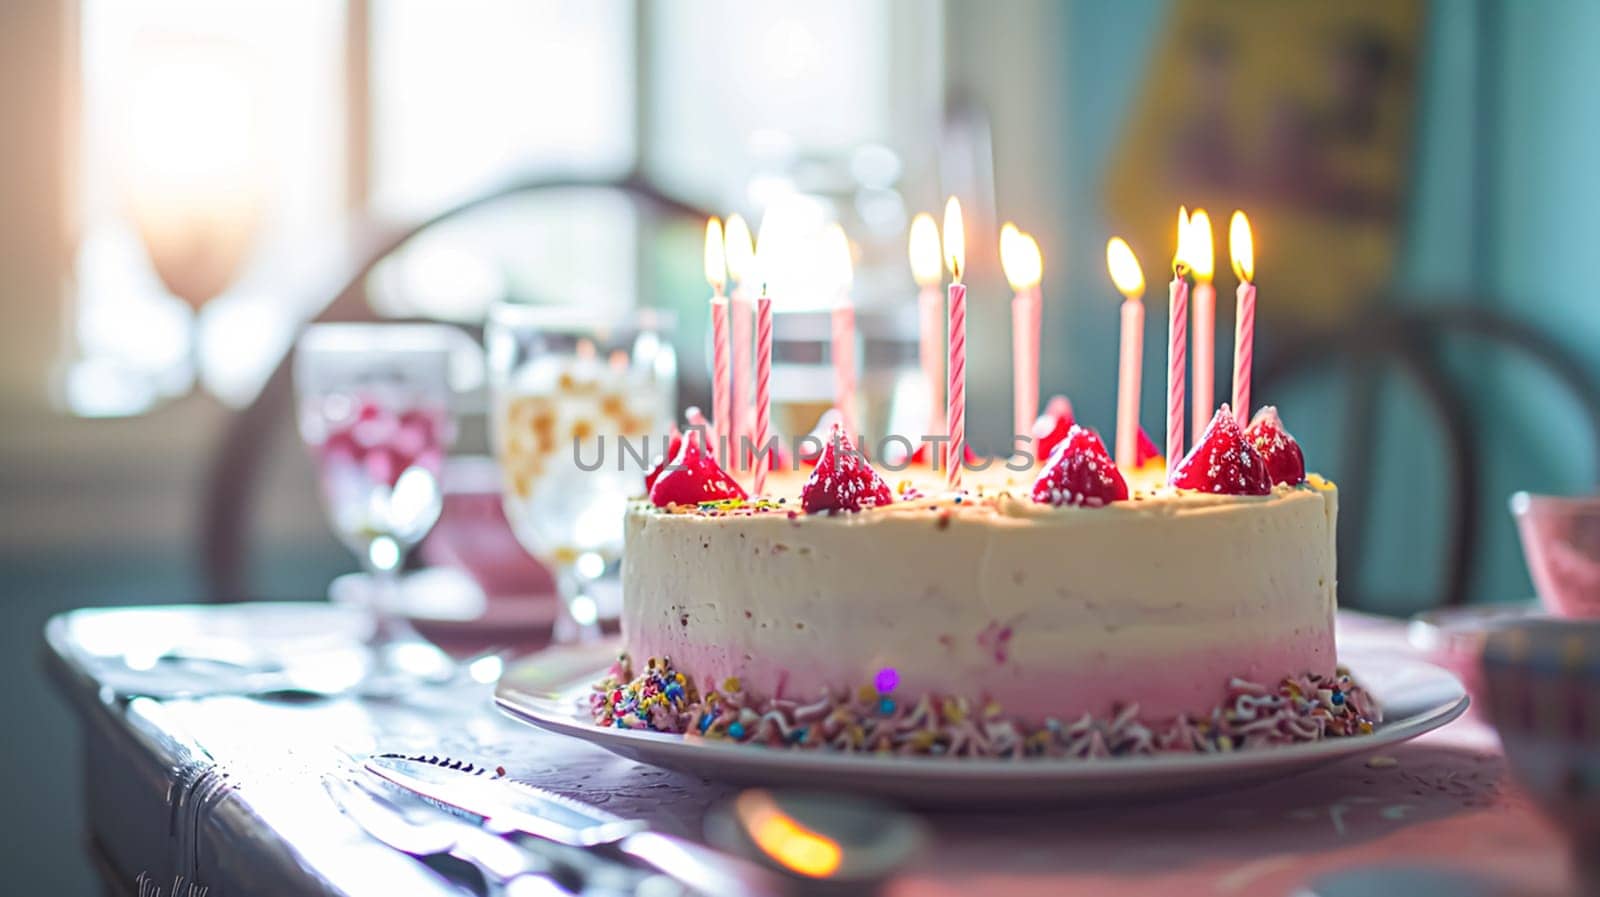 Birthday cake with candles and flowers on the table. Selective focus.